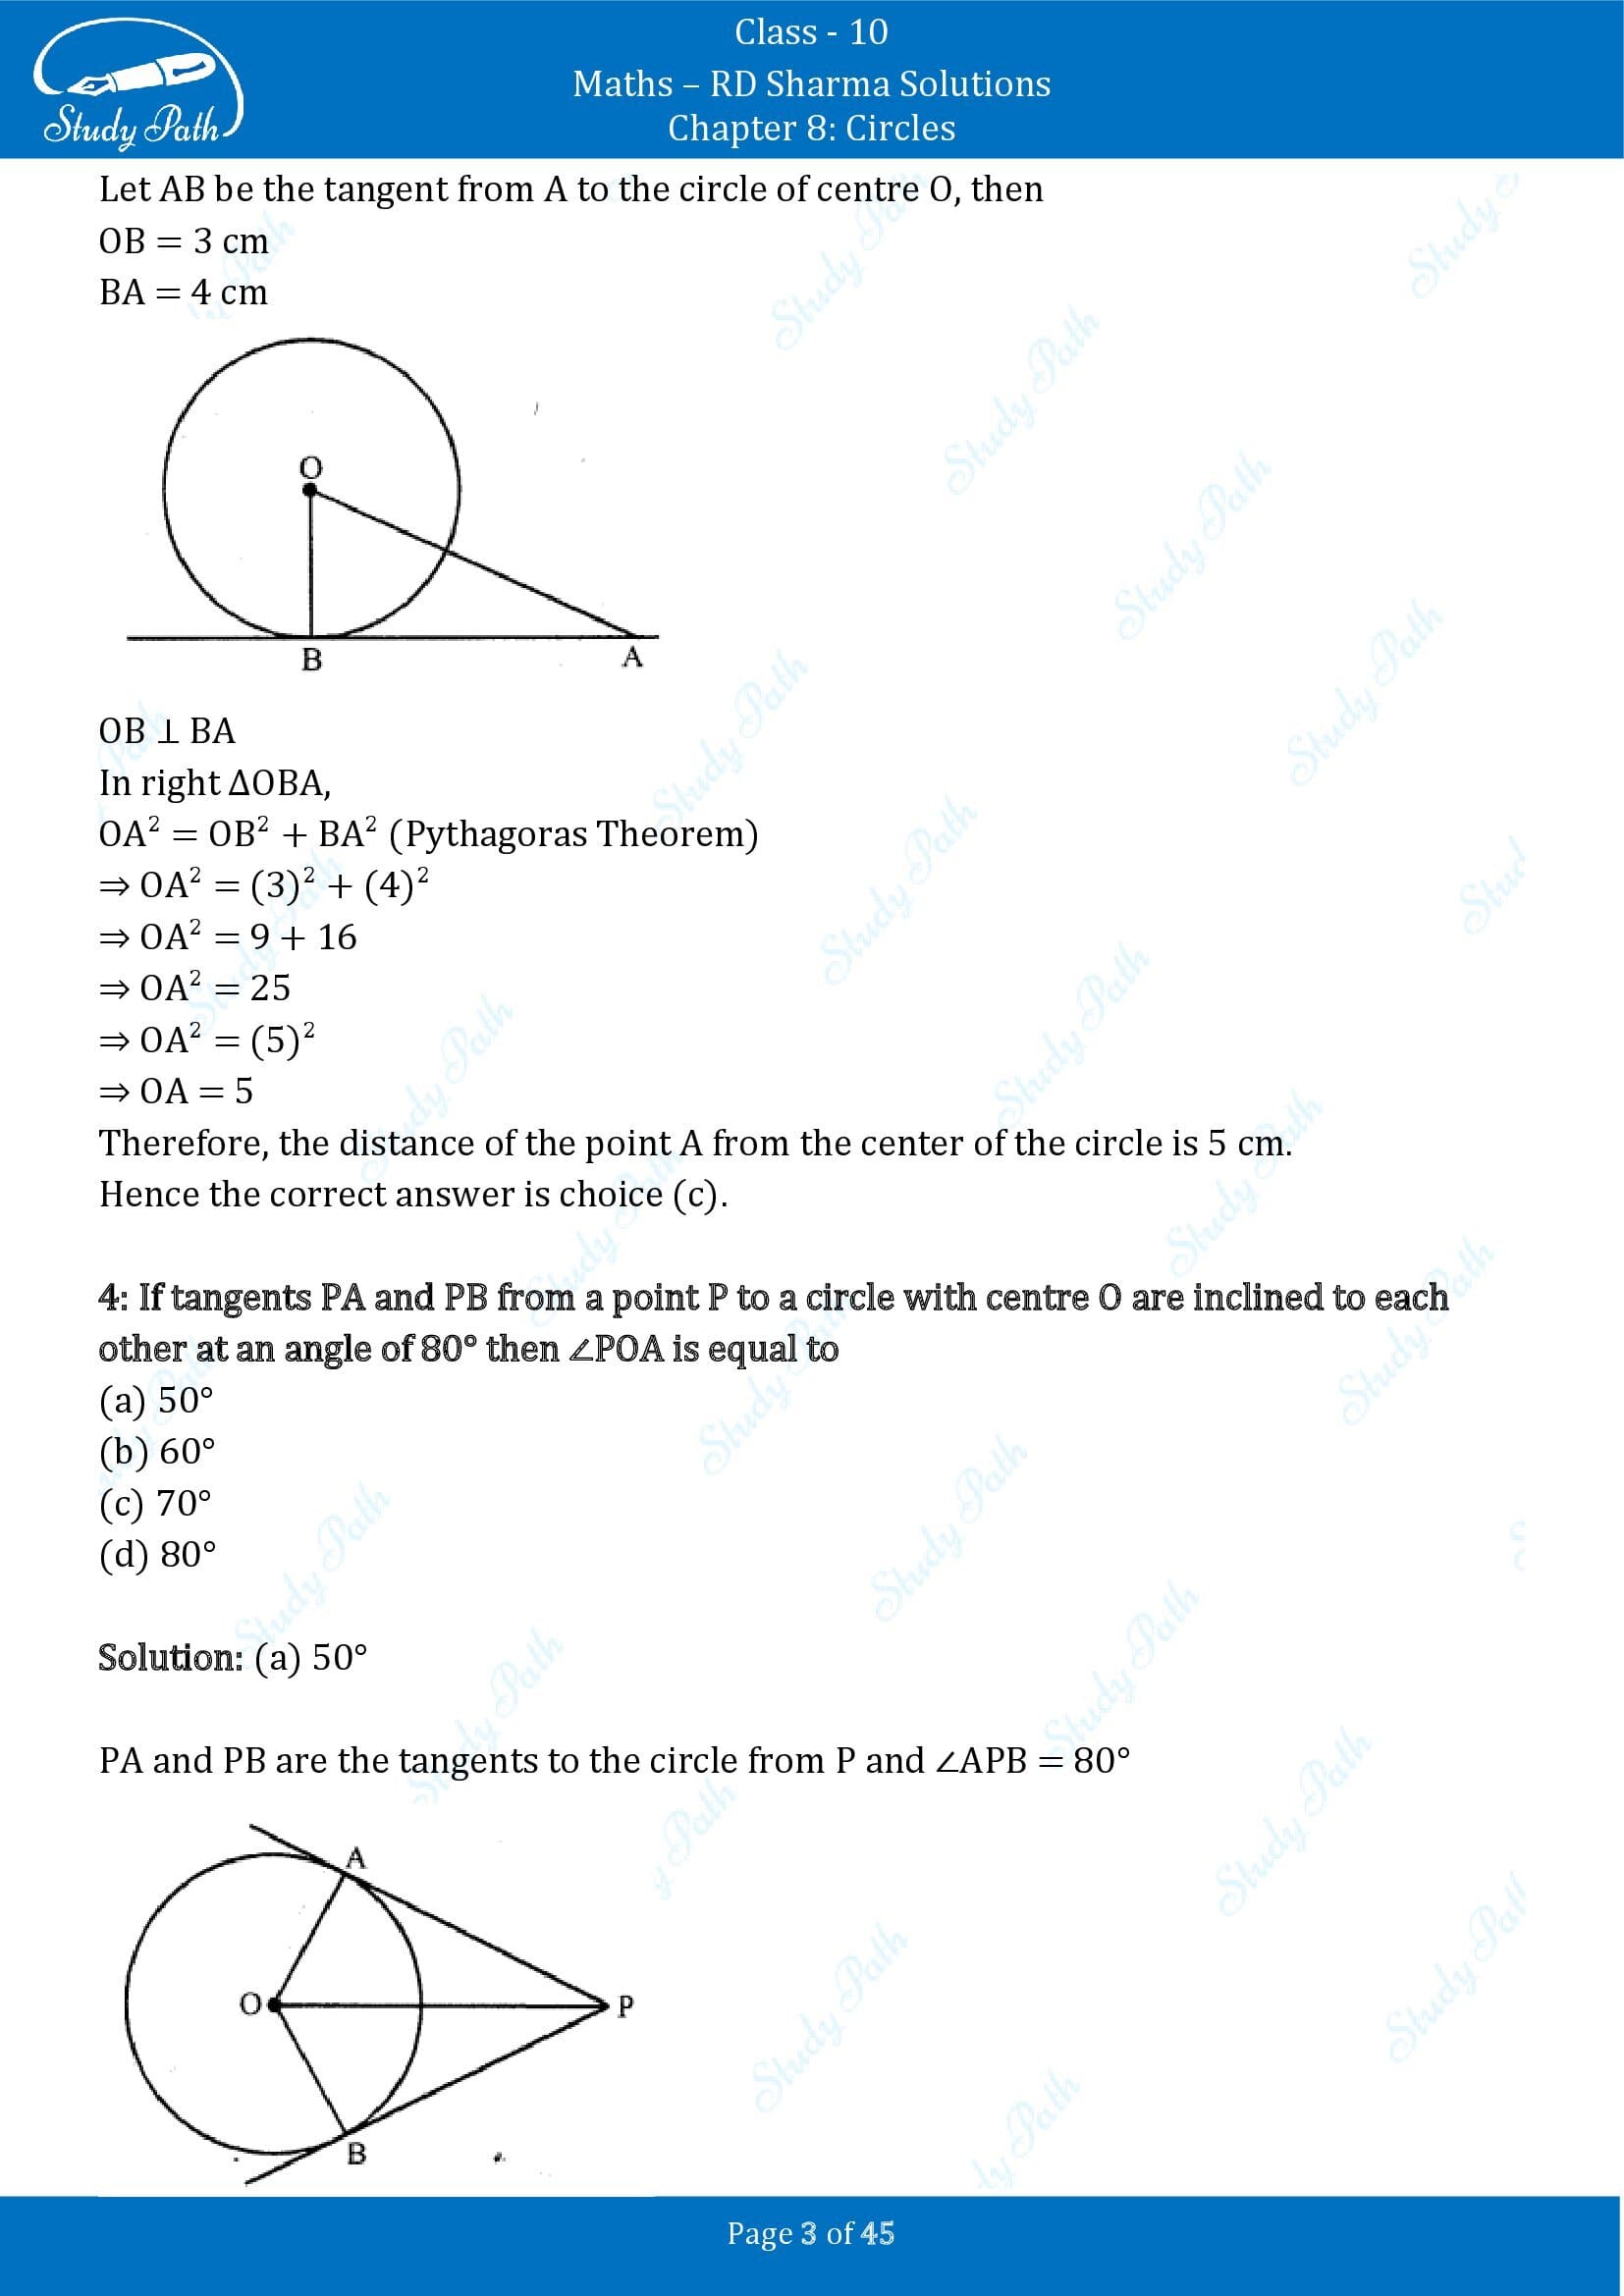 RD Sharma Solutions Class 10 Chapter 8 Circles Multiple Choice Questions MCQs 00003